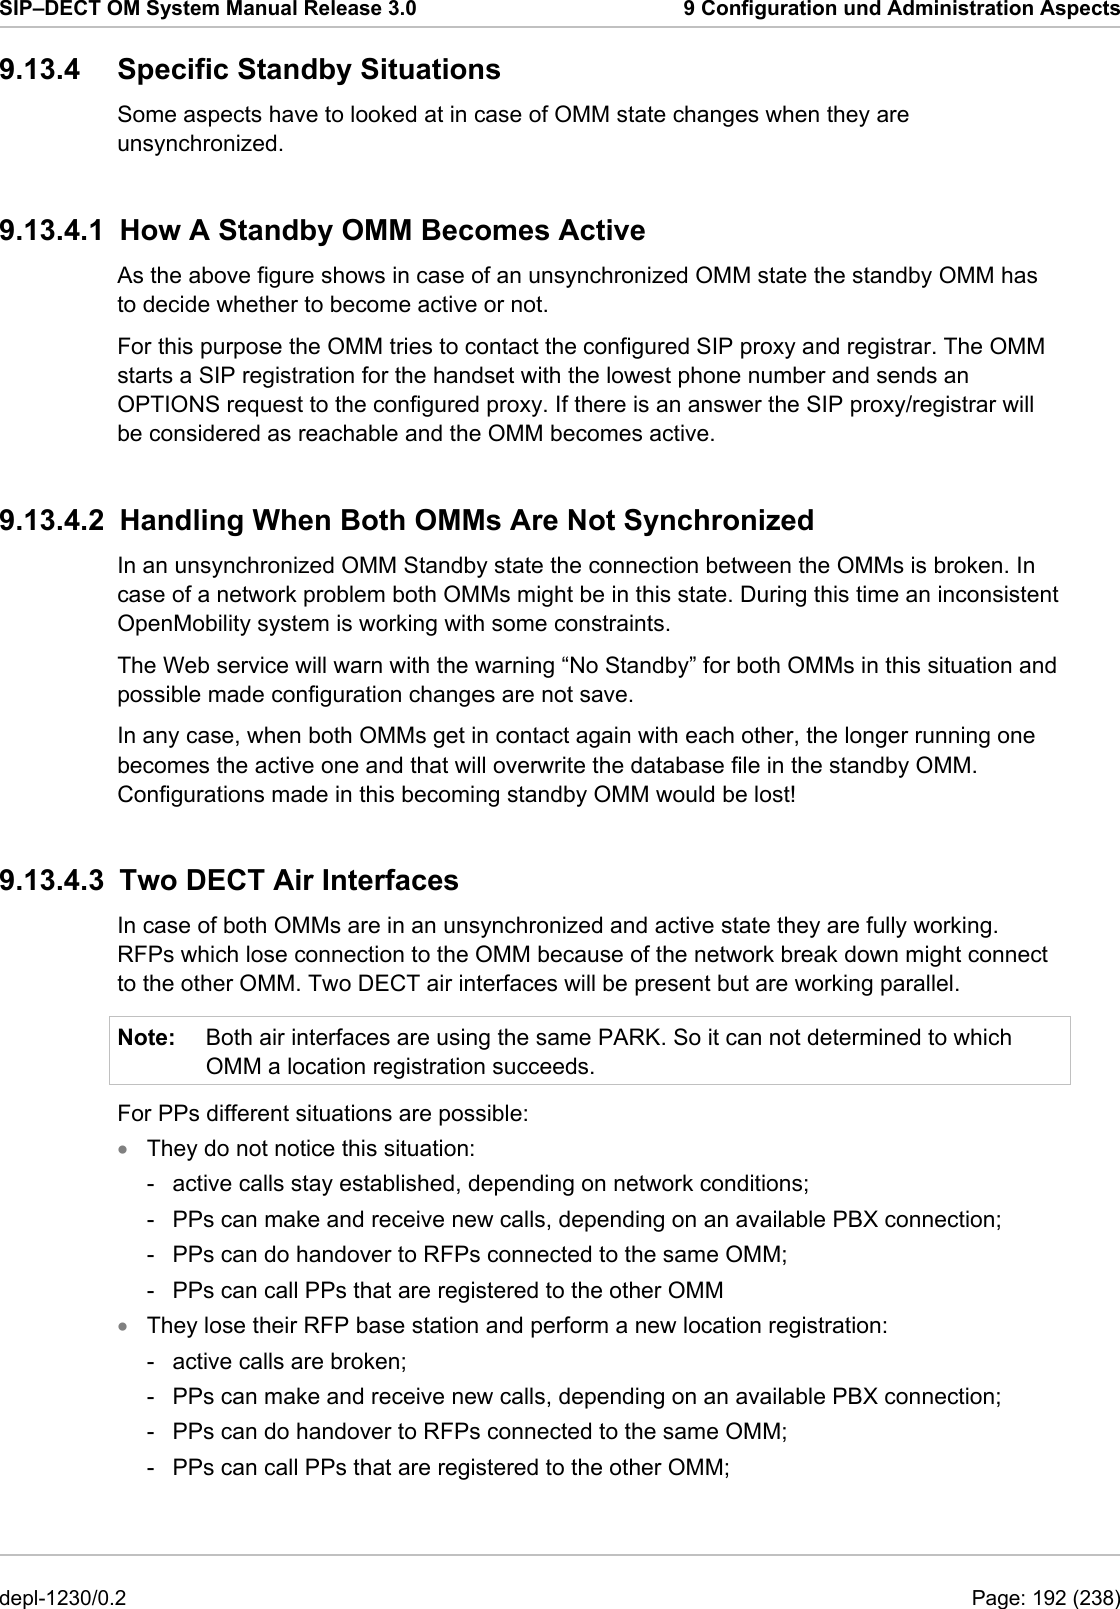 SIP–DECT OM System Manual Release 3.0  9 Configuration und Administration Aspects 9.13.4 Specific Standby Situations Some aspects have to looked at in case of OMM state changes when they are unsynchronized. 9.13.4.1  How A Standby OMM Becomes Active As the above figure shows in case of an unsynchronized OMM state the standby OMM has to decide whether to become active or not.  For this purpose the OMM tries to contact the configured SIP proxy and registrar. The OMM starts a SIP registration for the handset with the lowest phone number and sends an OPTIONS request to the configured proxy. If there is an answer the SIP proxy/registrar will be considered as reachable and the OMM becomes active.  9.13.4.2  Handling When Both OMMs Are Not Synchronized In an unsynchronized OMM Standby state the connection between the OMMs is broken. In case of a network problem both OMMs might be in this state. During this time an inconsistent OpenMobility system is working with some constraints. The Web service will warn with the warning “No Standby” for both OMMs in this situation and possible made configuration changes are not save. In any case, when both OMMs get in contact again with each other, the longer running one becomes the active one and that will overwrite the database file in the standby OMM. Configurations made in this becoming standby OMM would be lost! 9.13.4.3  Two DECT Air Interfaces In case of both OMMs are in an unsynchronized and active state they are fully working. RFPs which lose connection to the OMM because of the network break down might connect to the other OMM. Two DECT air interfaces will be present but are working parallel. Note:  Both air interfaces are using the same PARK. So it can not determined to which OMM a location registration succeeds. For PPs different situations are possible: They do not notice this situation: • • -  active calls stay established, depending on network conditions; -  PPs can make and receive new calls, depending on an available PBX connection; -  PPs can do handover to RFPs connected to the same OMM; -  PPs can call PPs that are registered to the other OMM They lose their RFP base station and perform a new location registration: -  active calls are broken; -  PPs can make and receive new calls, depending on an available PBX connection; -  PPs can do handover to RFPs connected to the same OMM; -  PPs can call PPs that are registered to the other OMM; depl-1230/0.2  Page: 192 (238) 